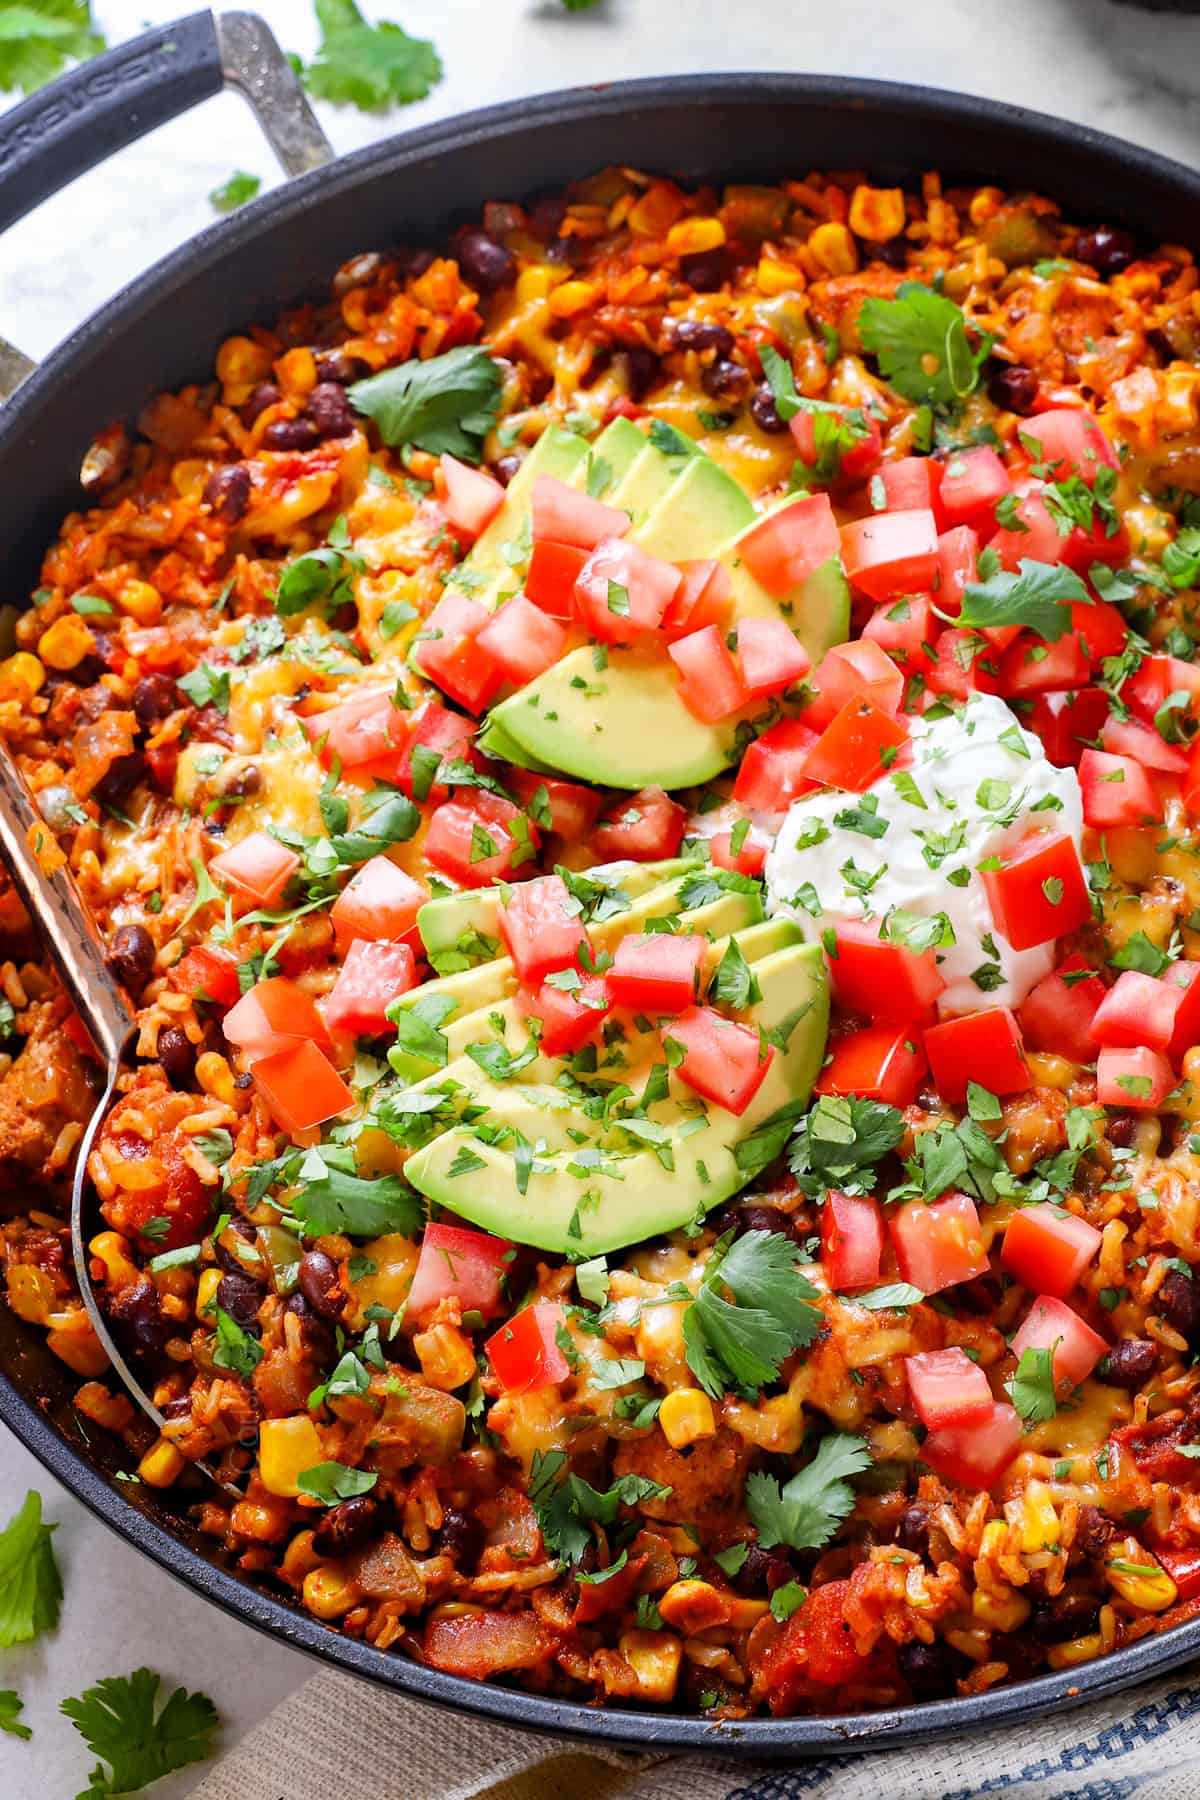 Fiesta chicken with chicken, rice, beans, corn and tomatoes all simmered together in one skillet